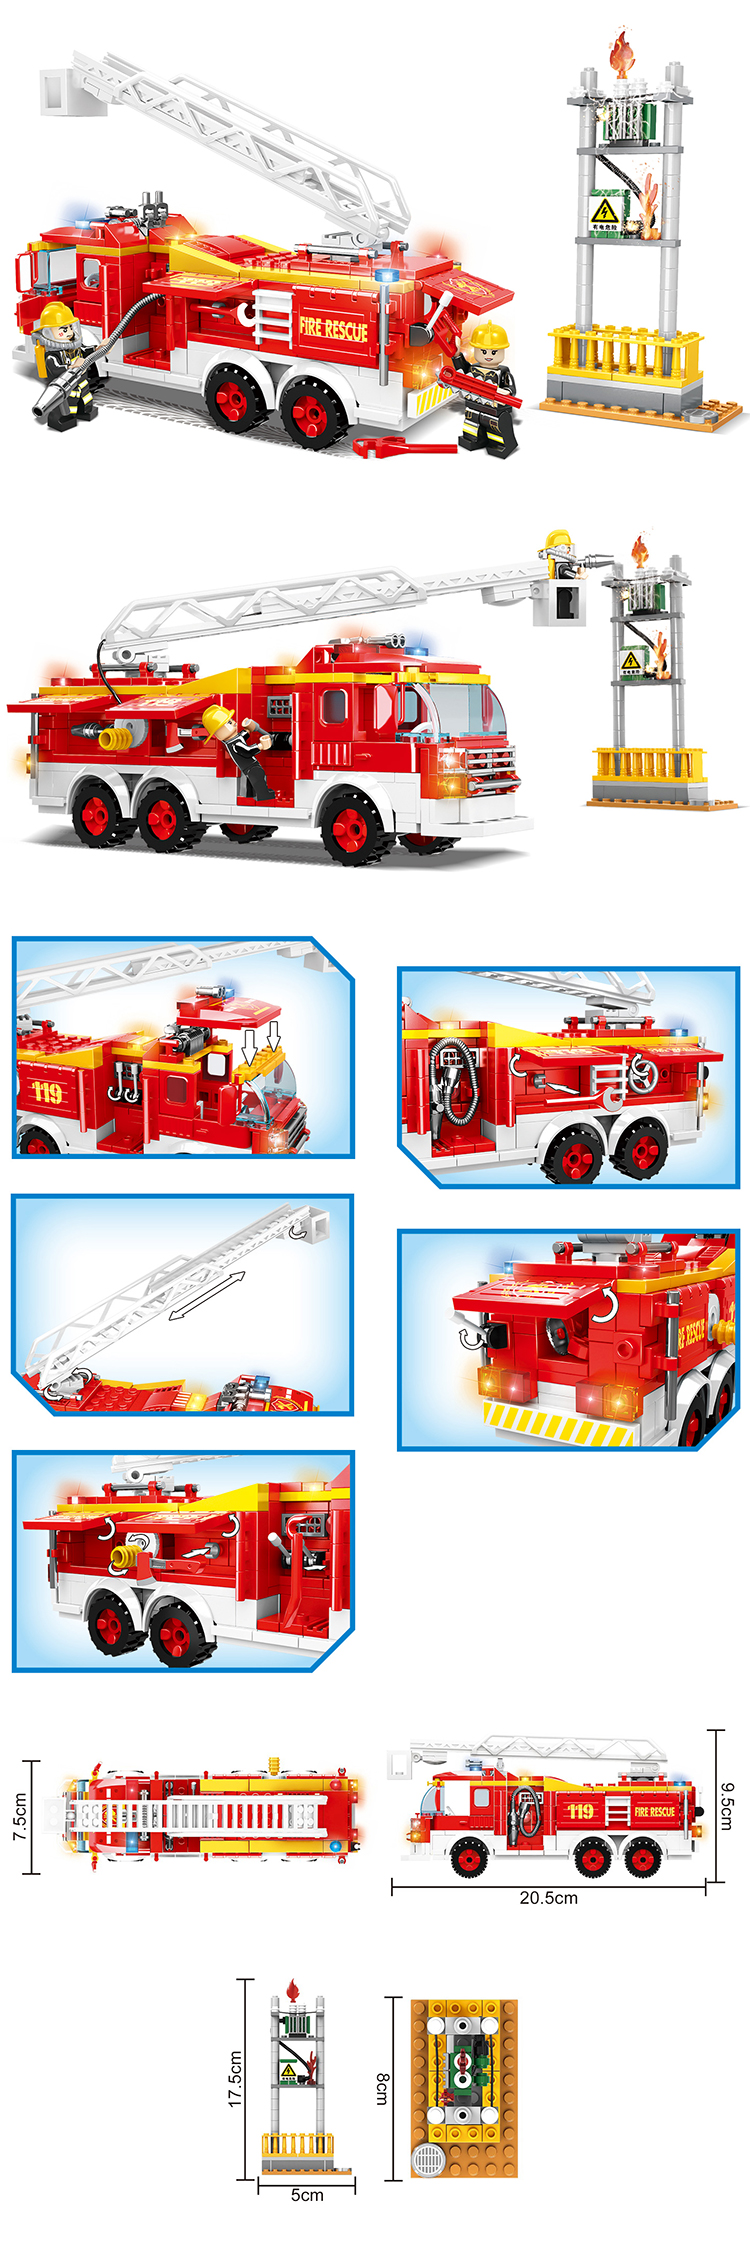 WOMA TOYS Compatible major brands Rescue Police hook ladder fire truck building block bricks toy model educational set jouet